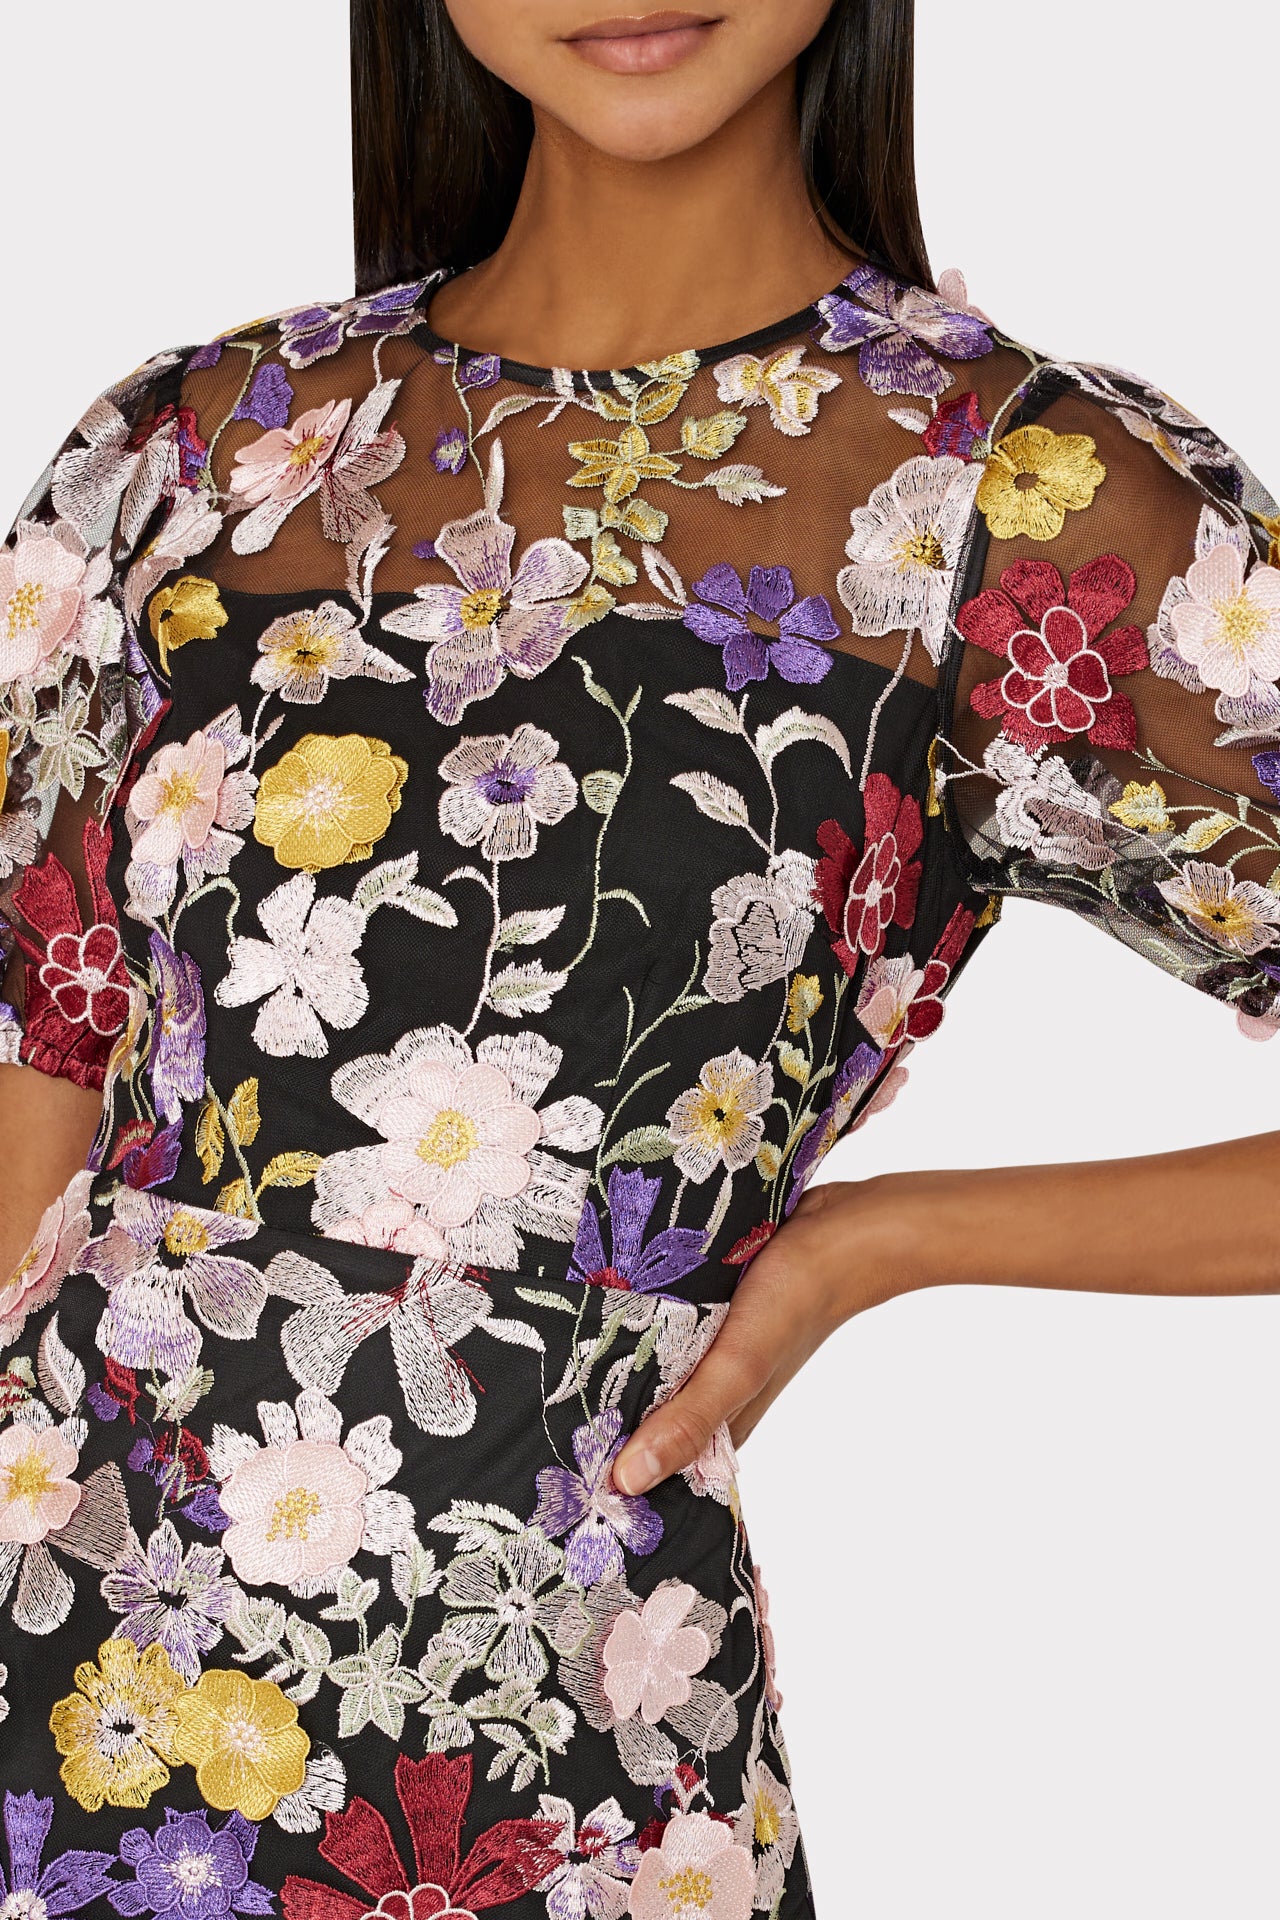 Yasmin Multi Floral Embroidery Dress